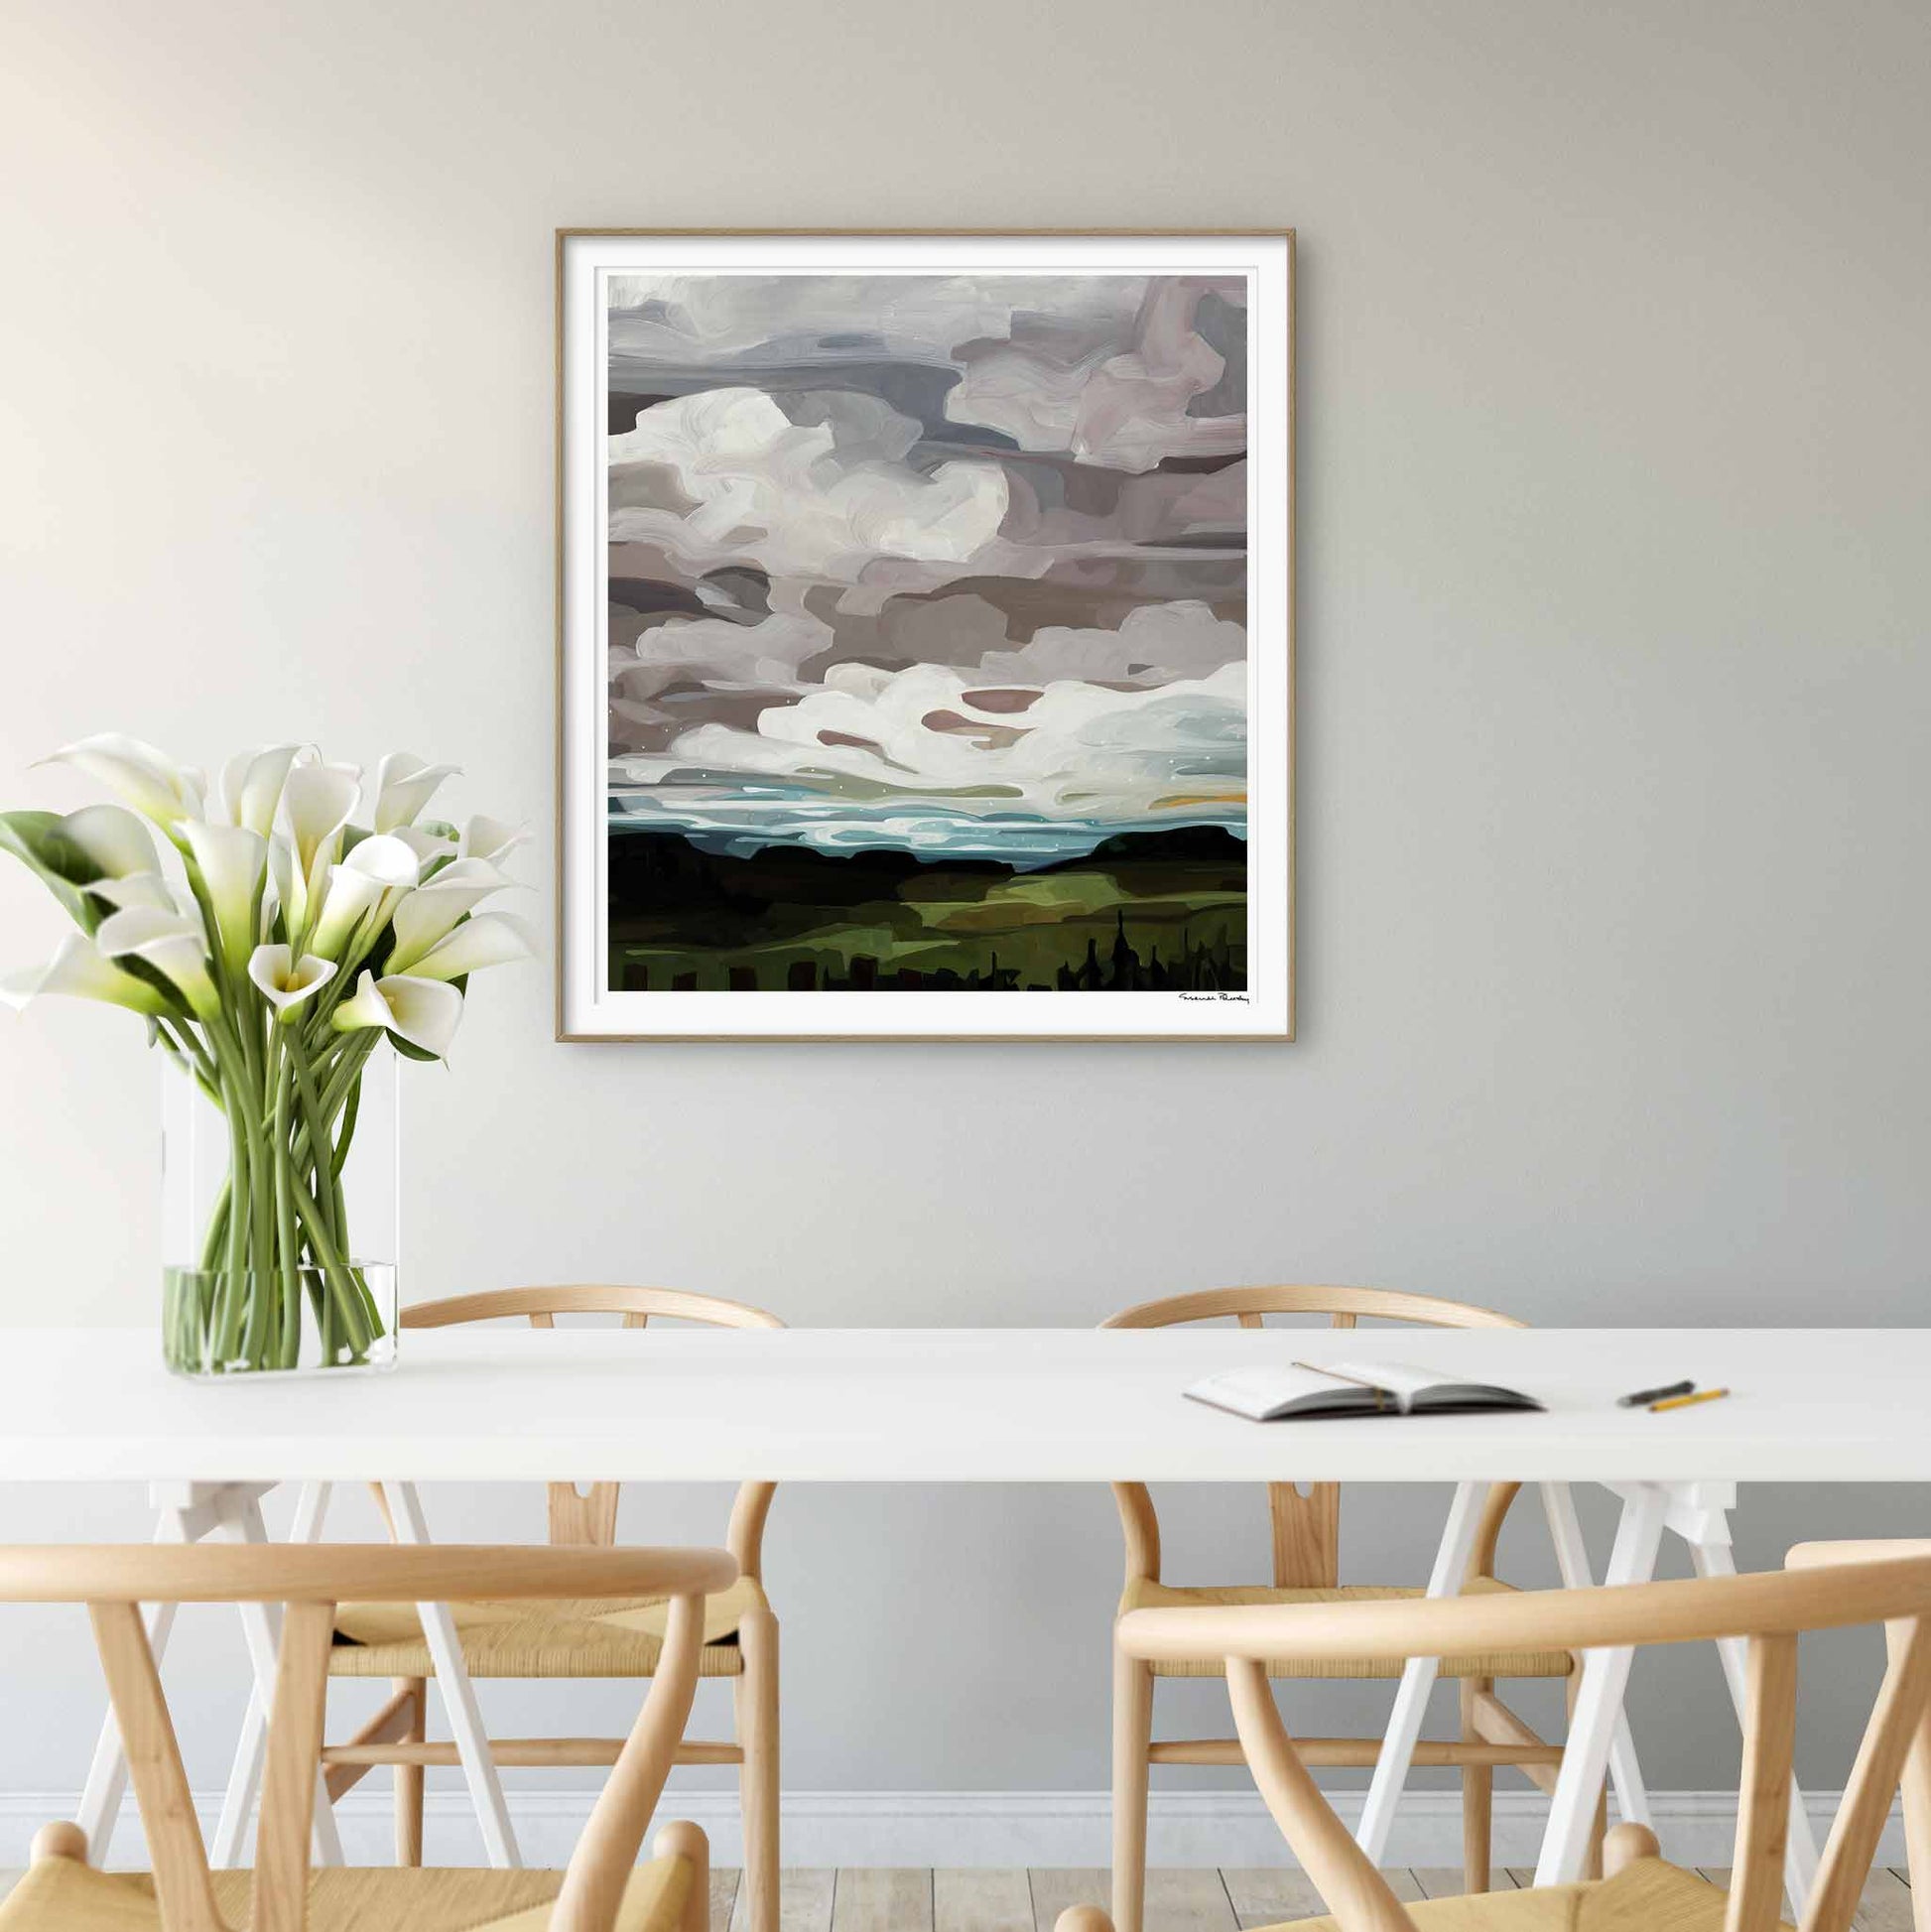 Oversized abstract landscape art print created from a warm grey painting of gren landscape and soft grey clouds